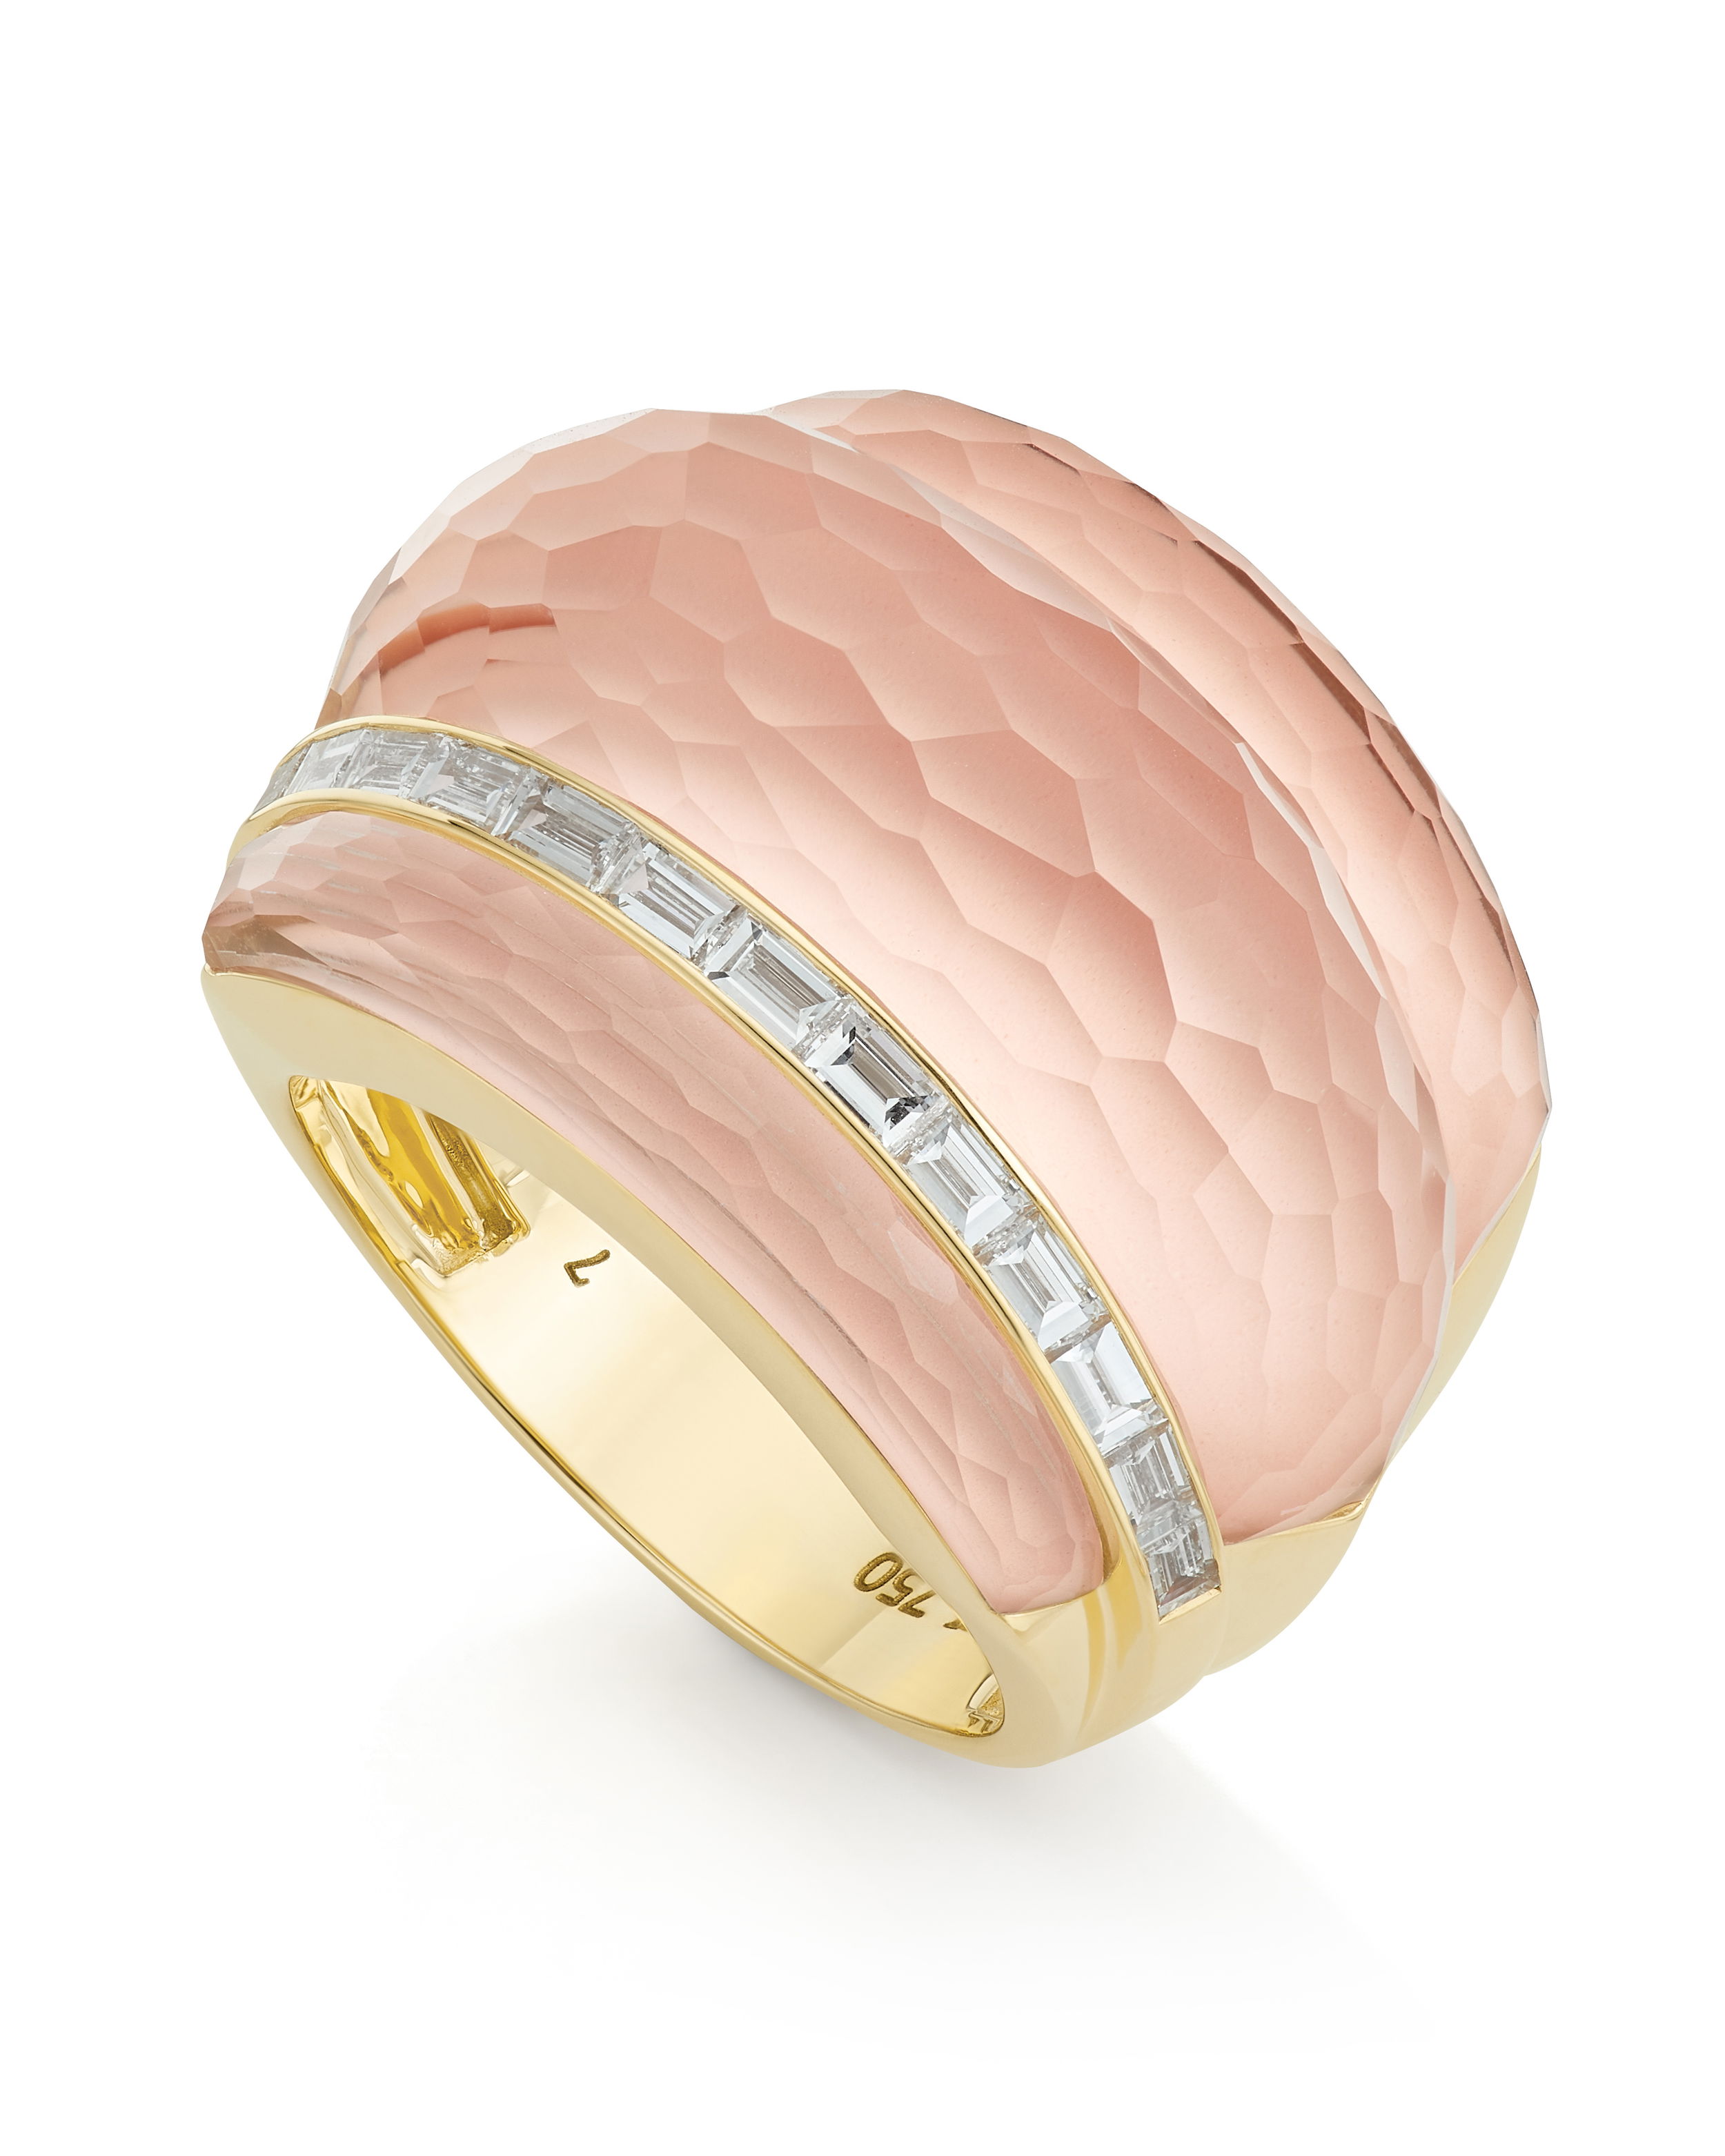 CH2 Amplified Cocktail Ring with Peach Quartz and White Diamonds in 18kt Yellow Gold - Size 7